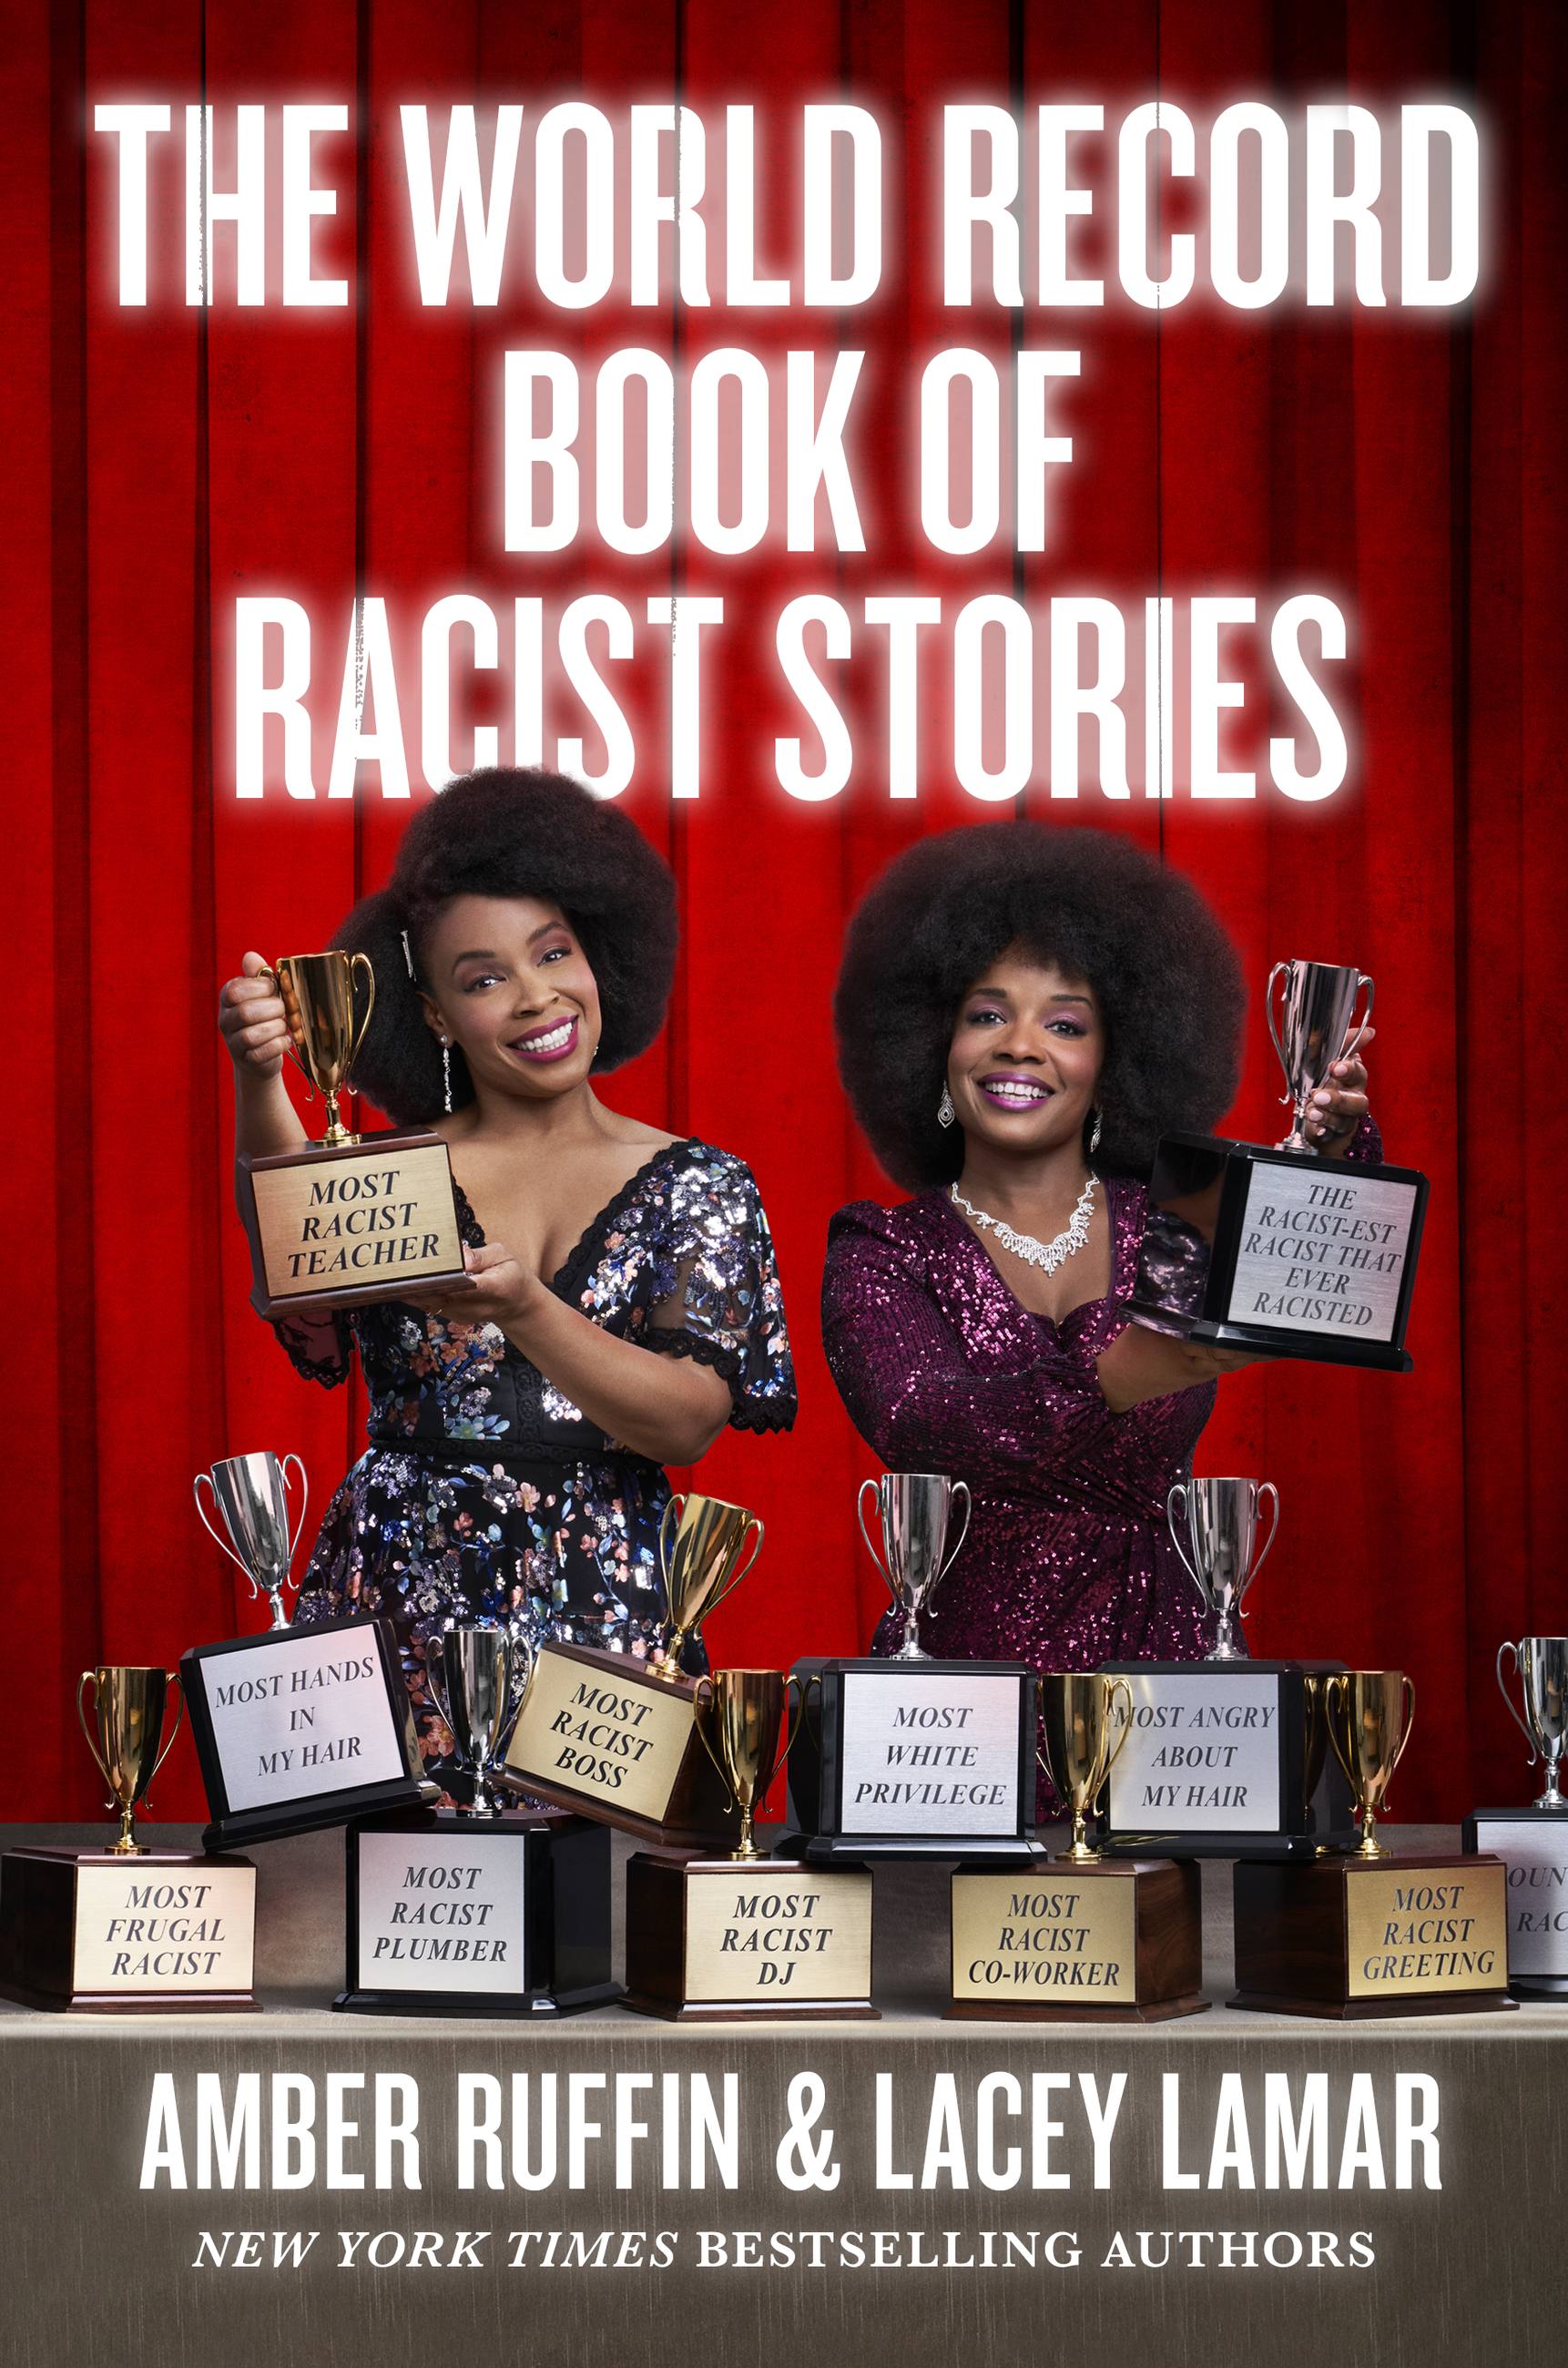 The World Record Book of Racist Stories by Amber Ruffin & LACEY LAMAR |  Hachette Book Group